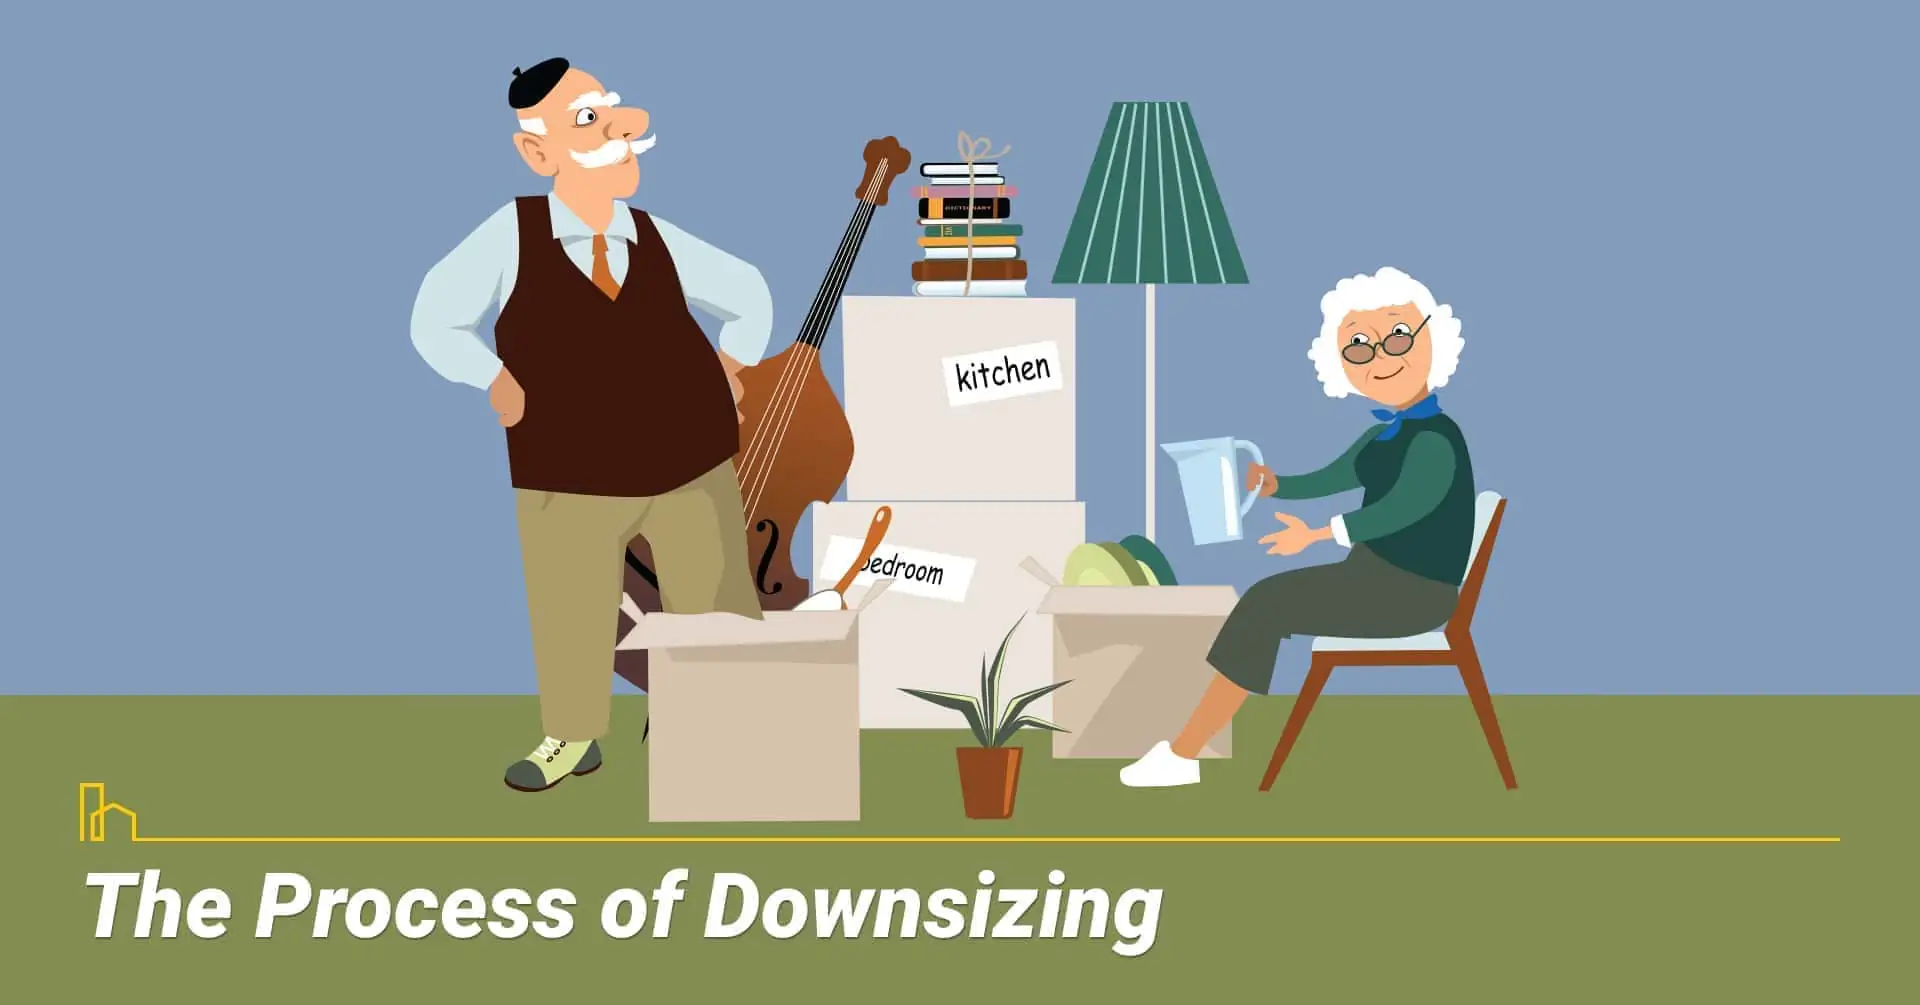 The Process of Downsizing, steps to downsizing